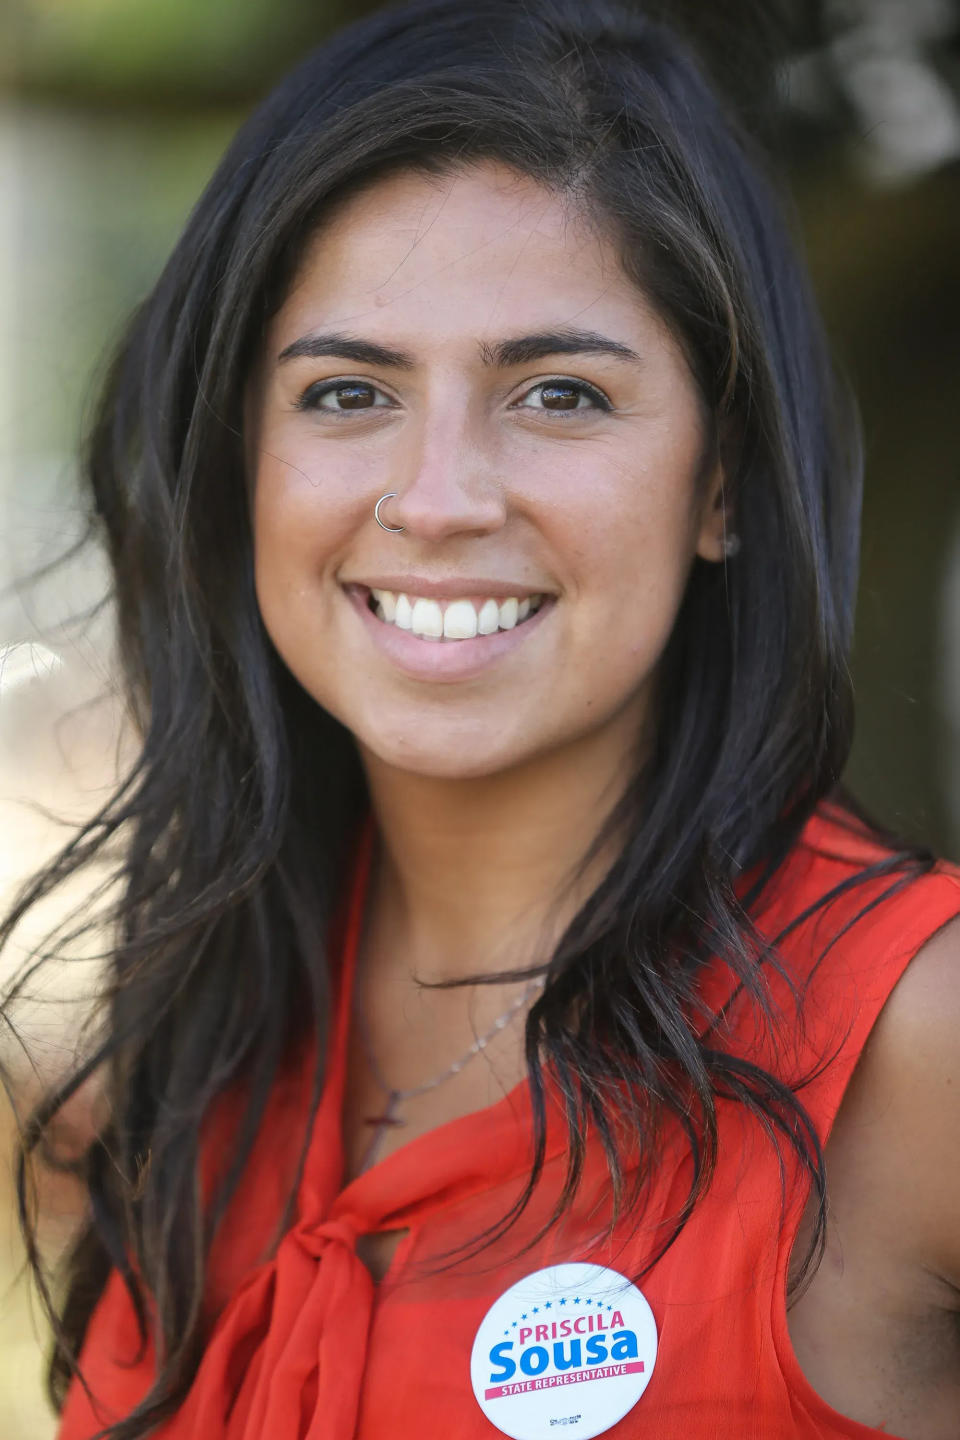 State Rep. Priscila Sousa said it can be difficult for new people to join the Framingham Democratic Committee, even after they're elected to public positions.